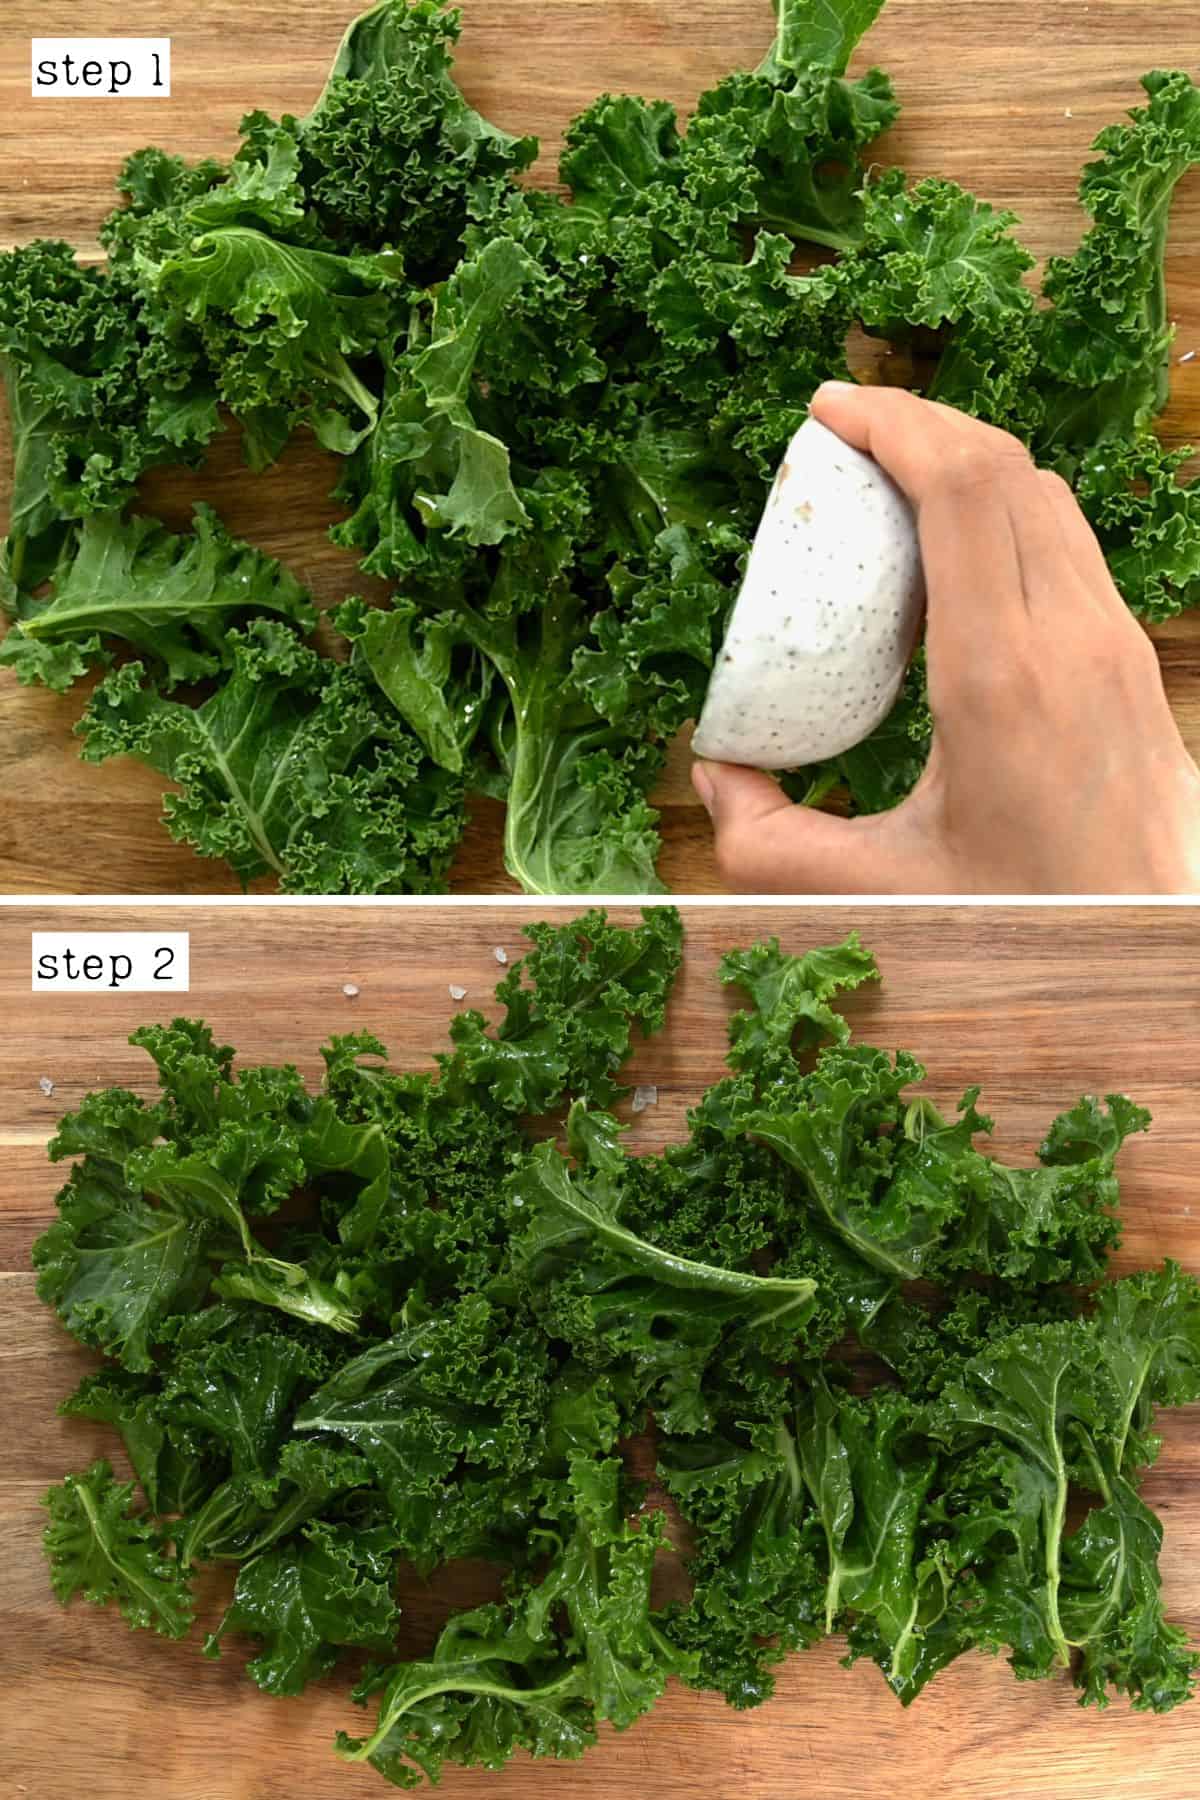 Steps for seasoning kale with olive oil and salt